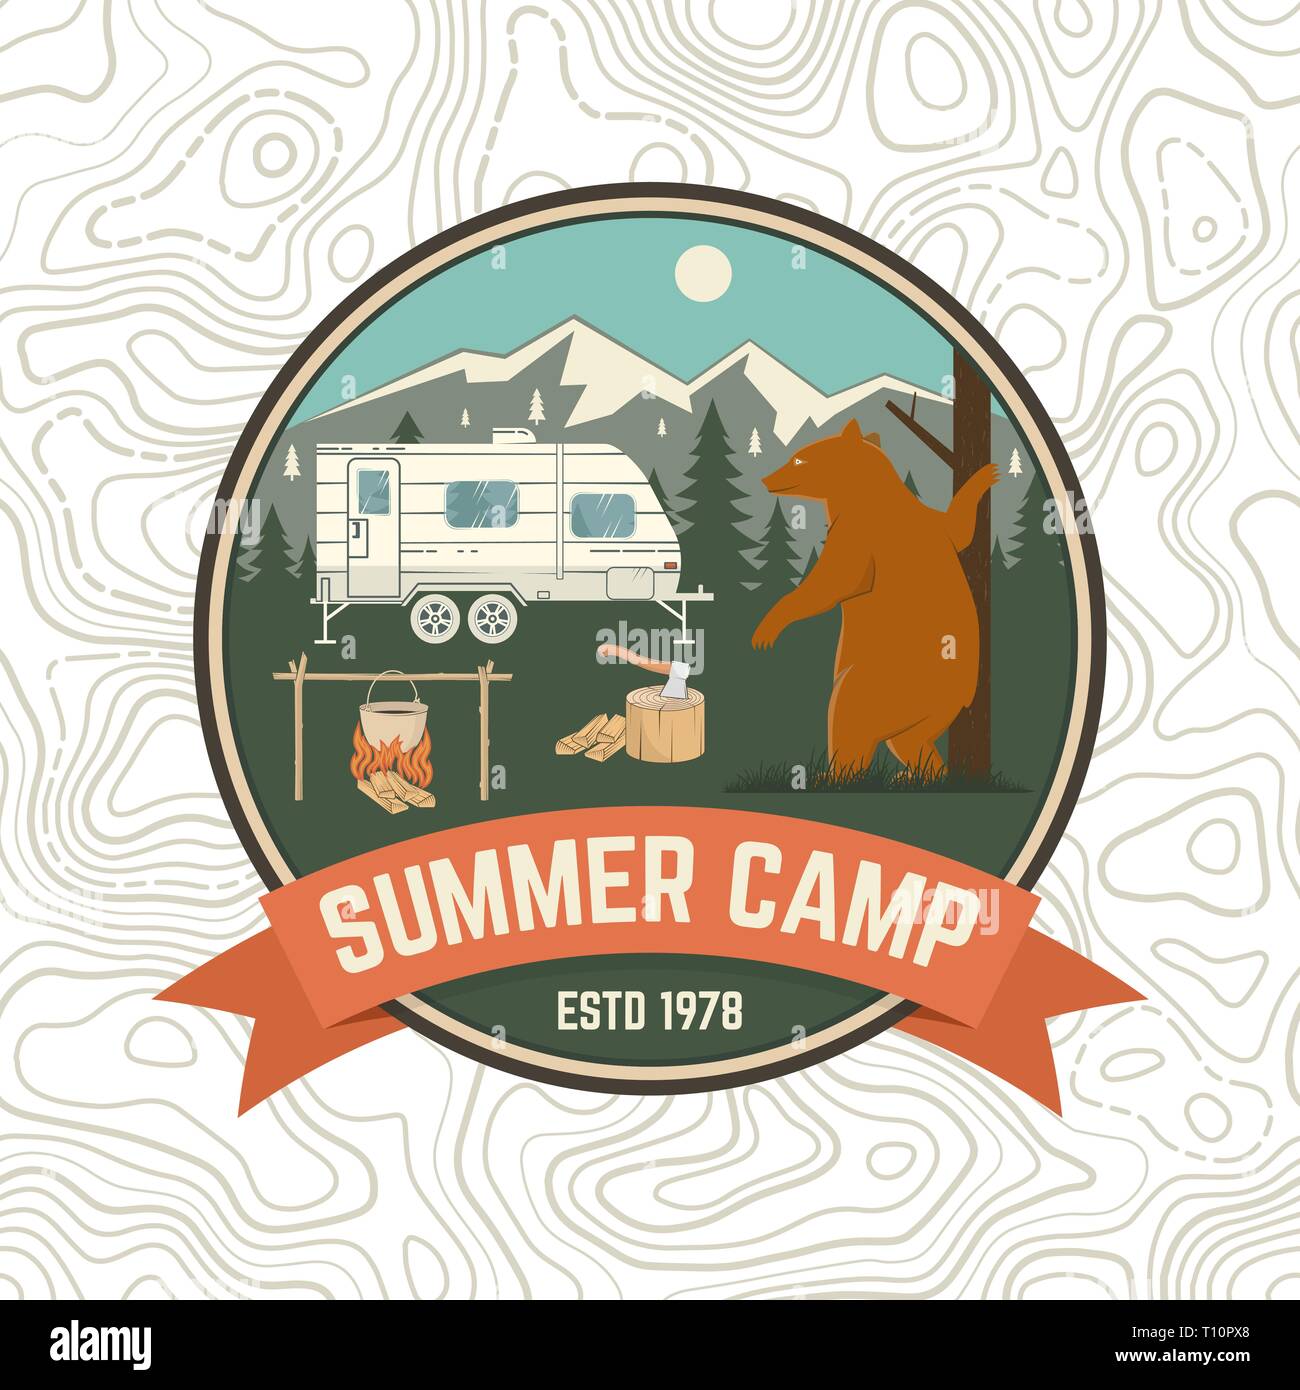 Summer camp patch. Vector illustration. Concept for shirt or logo, print, stamp, apparel or tee. Vintage typography design with camping trailer, bear, campfire and forest silhouette. Stock Vector